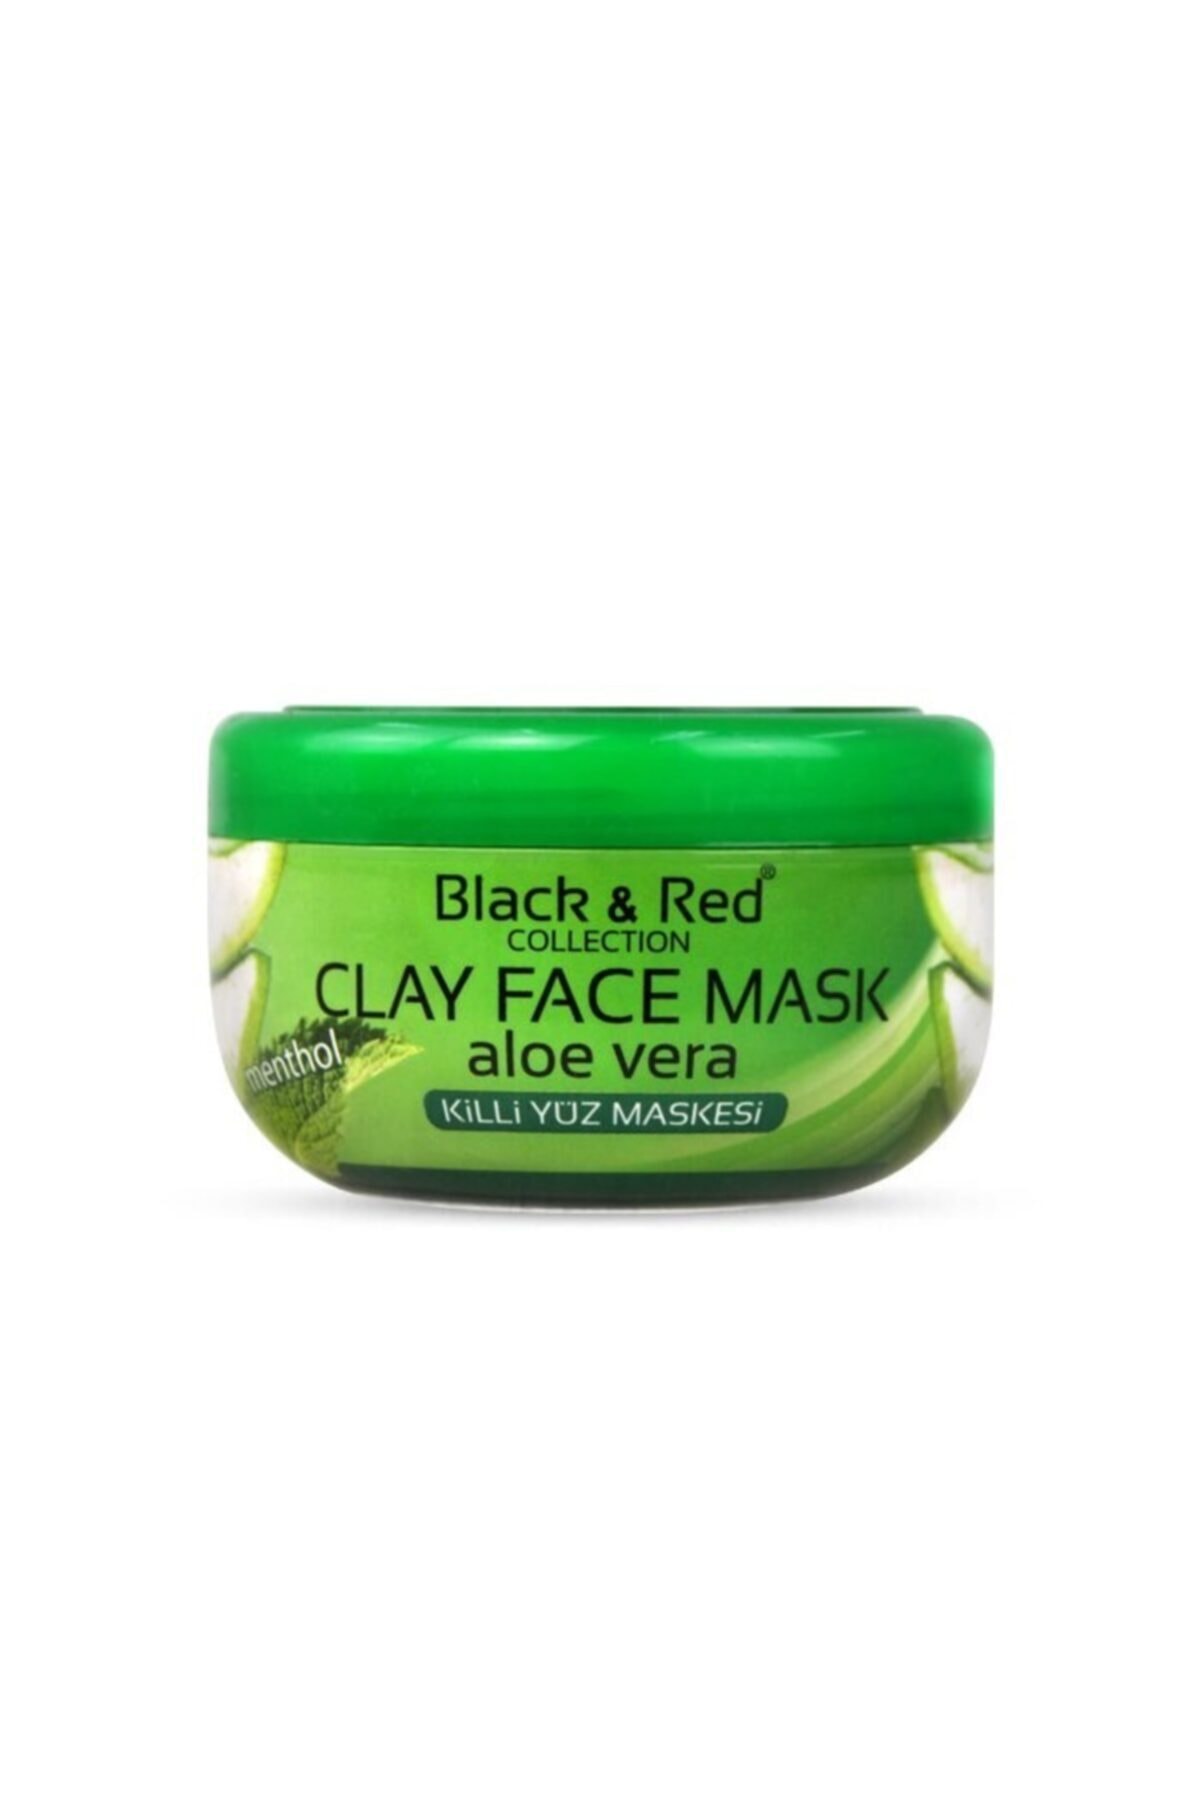 Black Red Black&red Clay Face Mask Aloe Vera